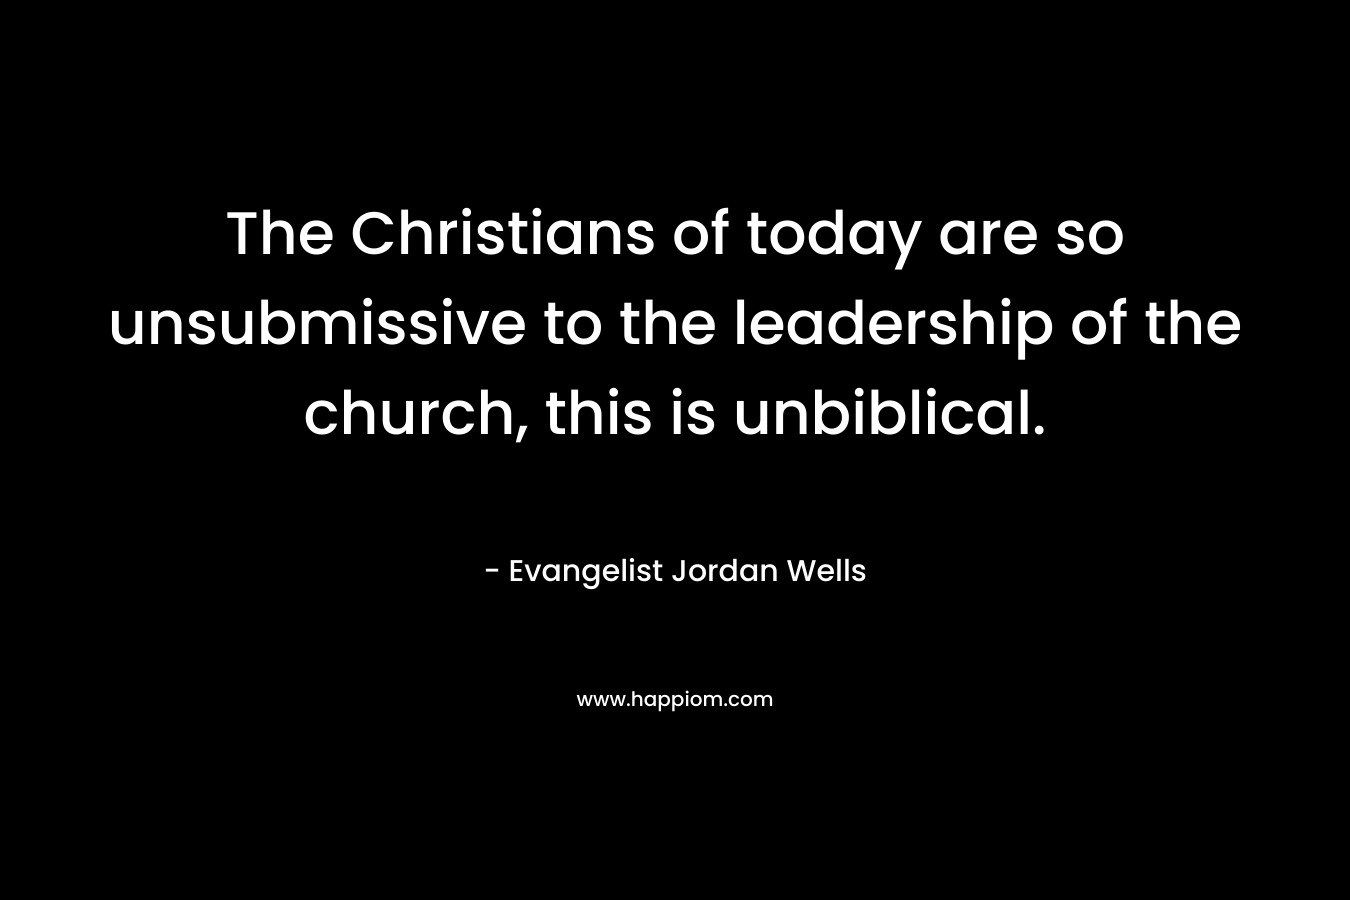 The Christians of today are so unsubmissive to the leadership of the church, this is unbiblical. – Evangelist Jordan Wells